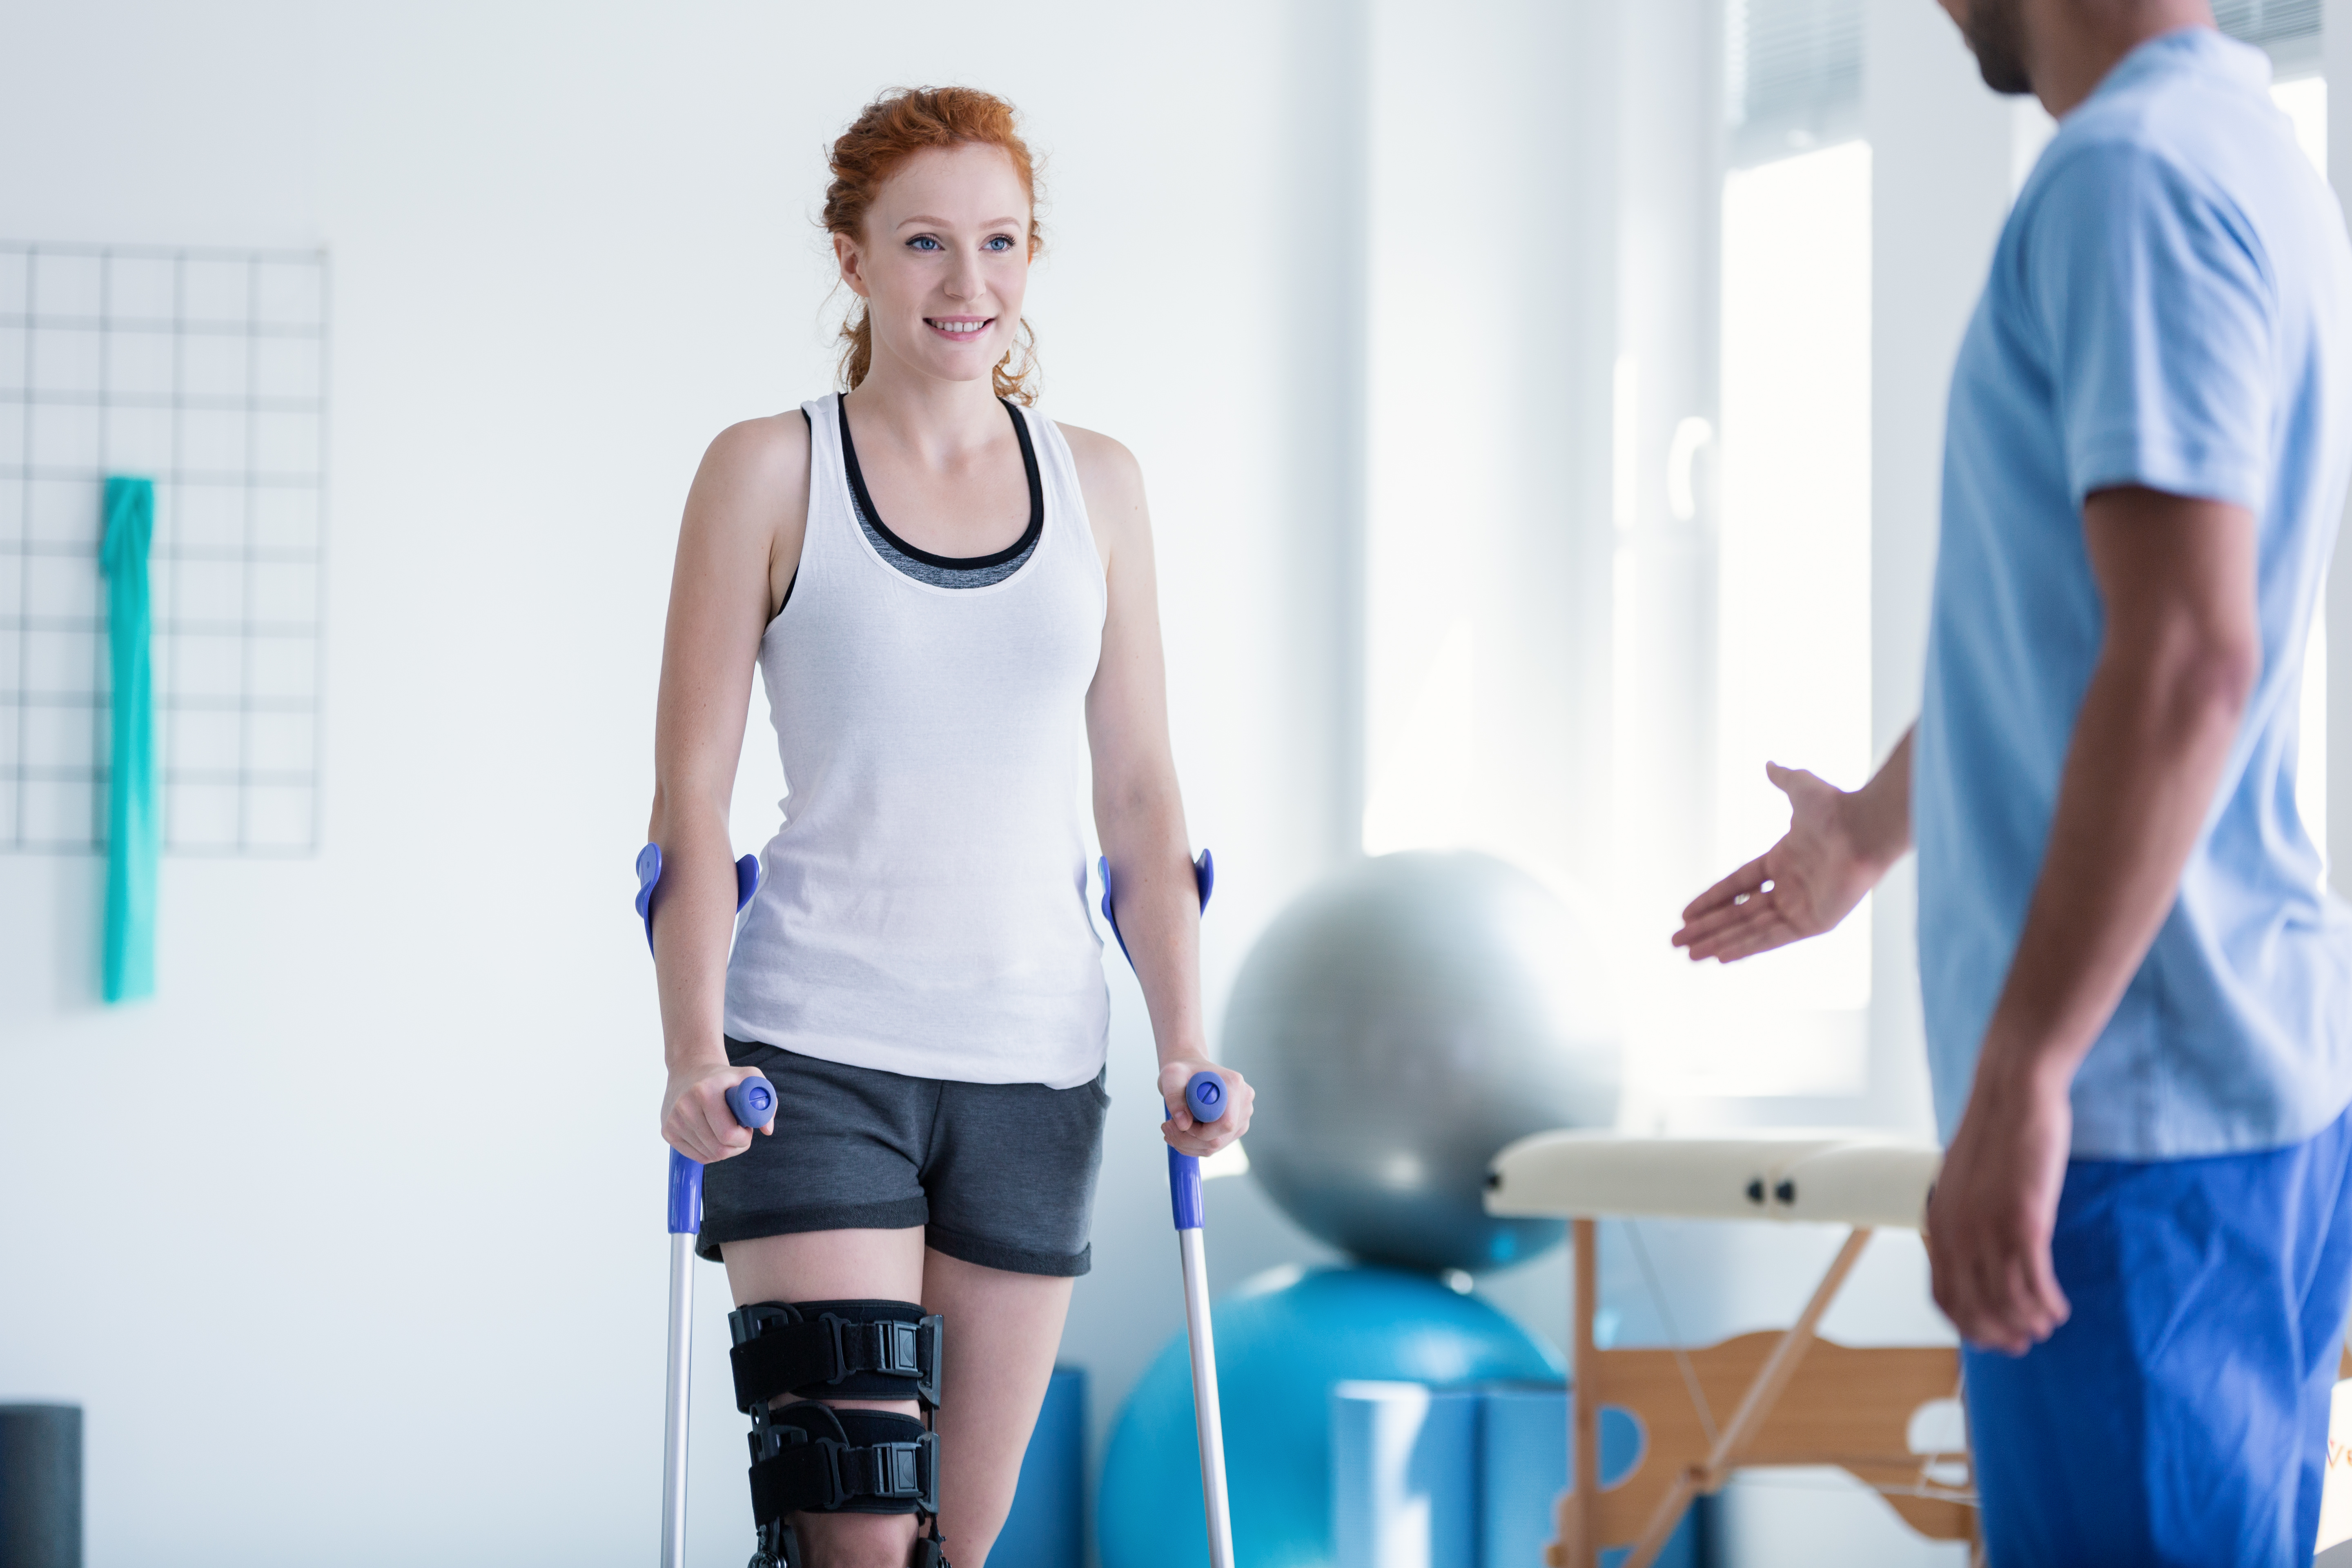 Woman walking with crutches during physiotherapy